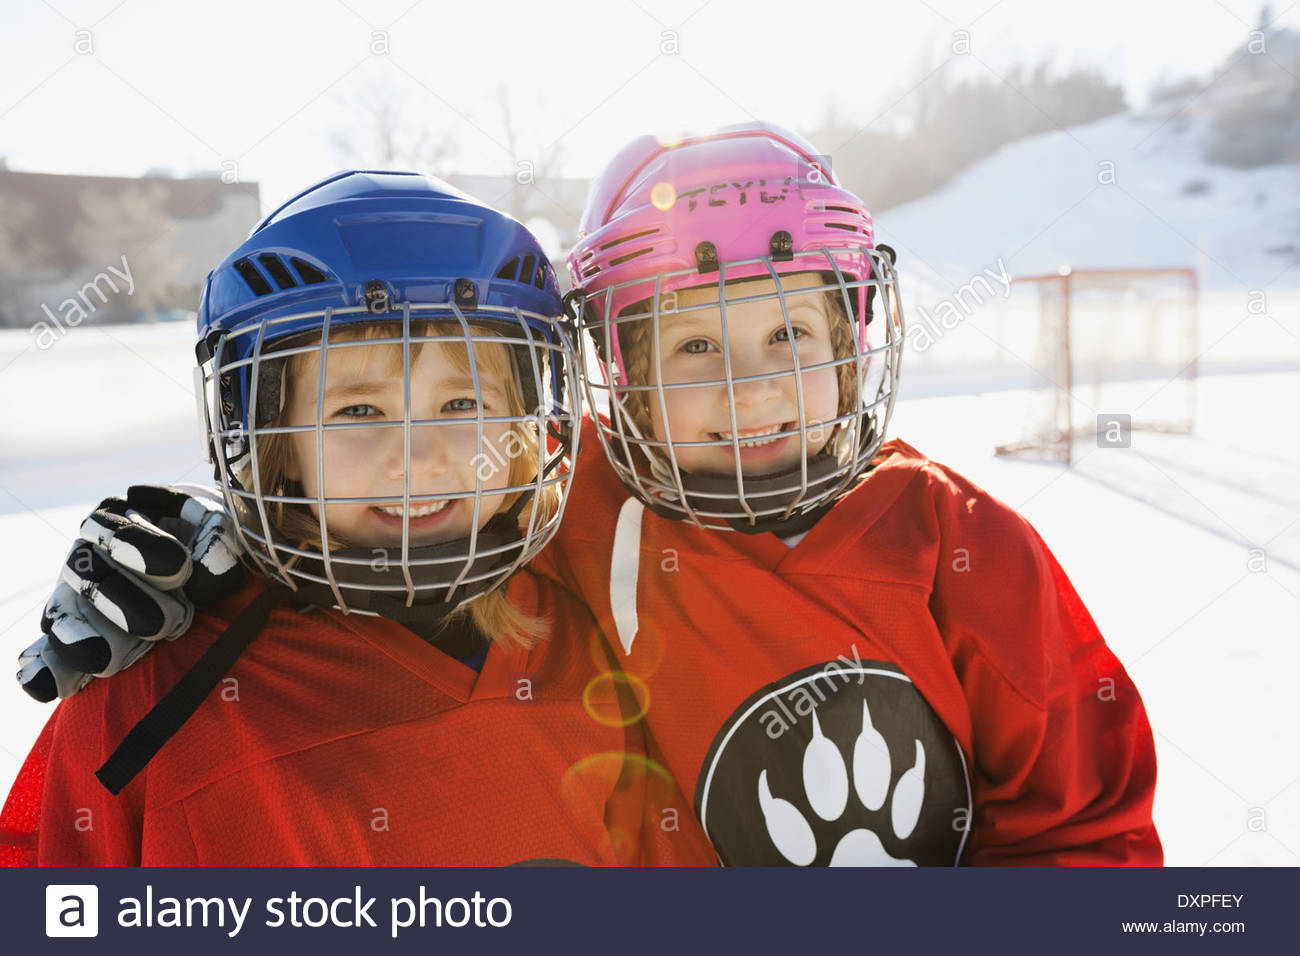 Outdoor Lifestyle Portrait Of Pretty Sexy Young Girl In Hockey Jersey Style  Dress Sitting On Street Bicycle Stock Photo, Picture and Royalty Free  Image. Image 82510891.